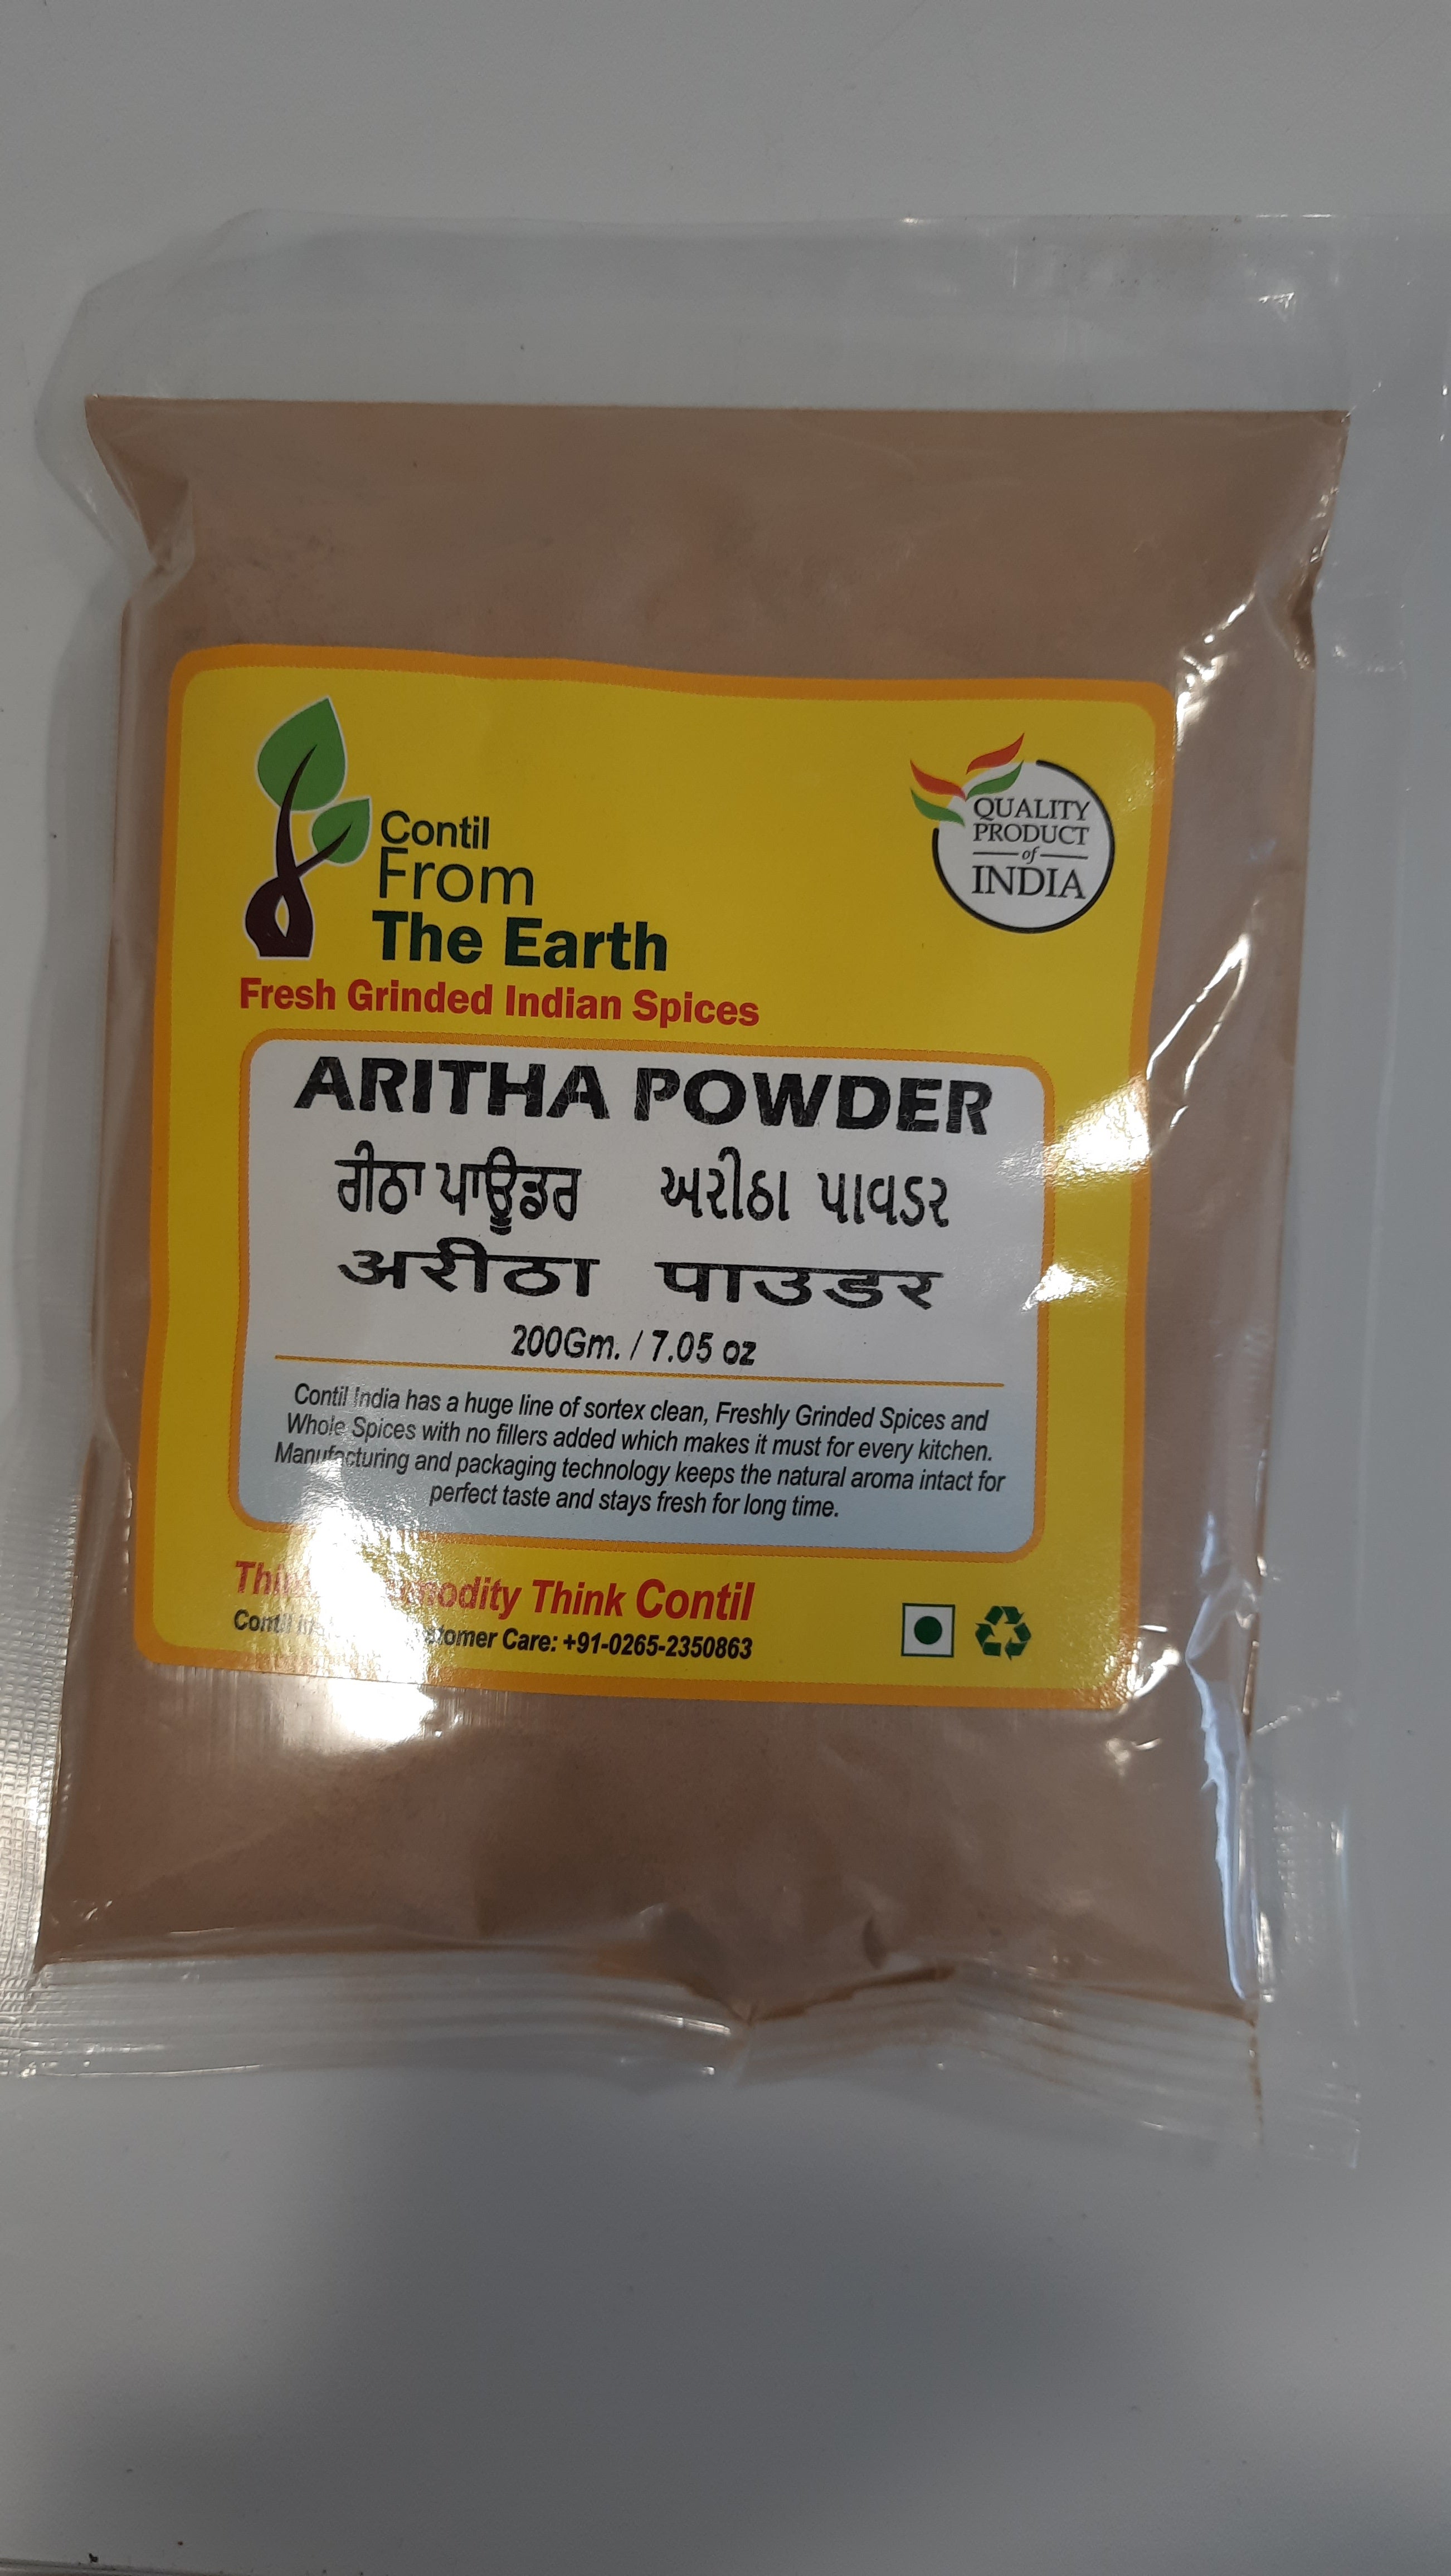 From the Earth - Aritha Powder 200g